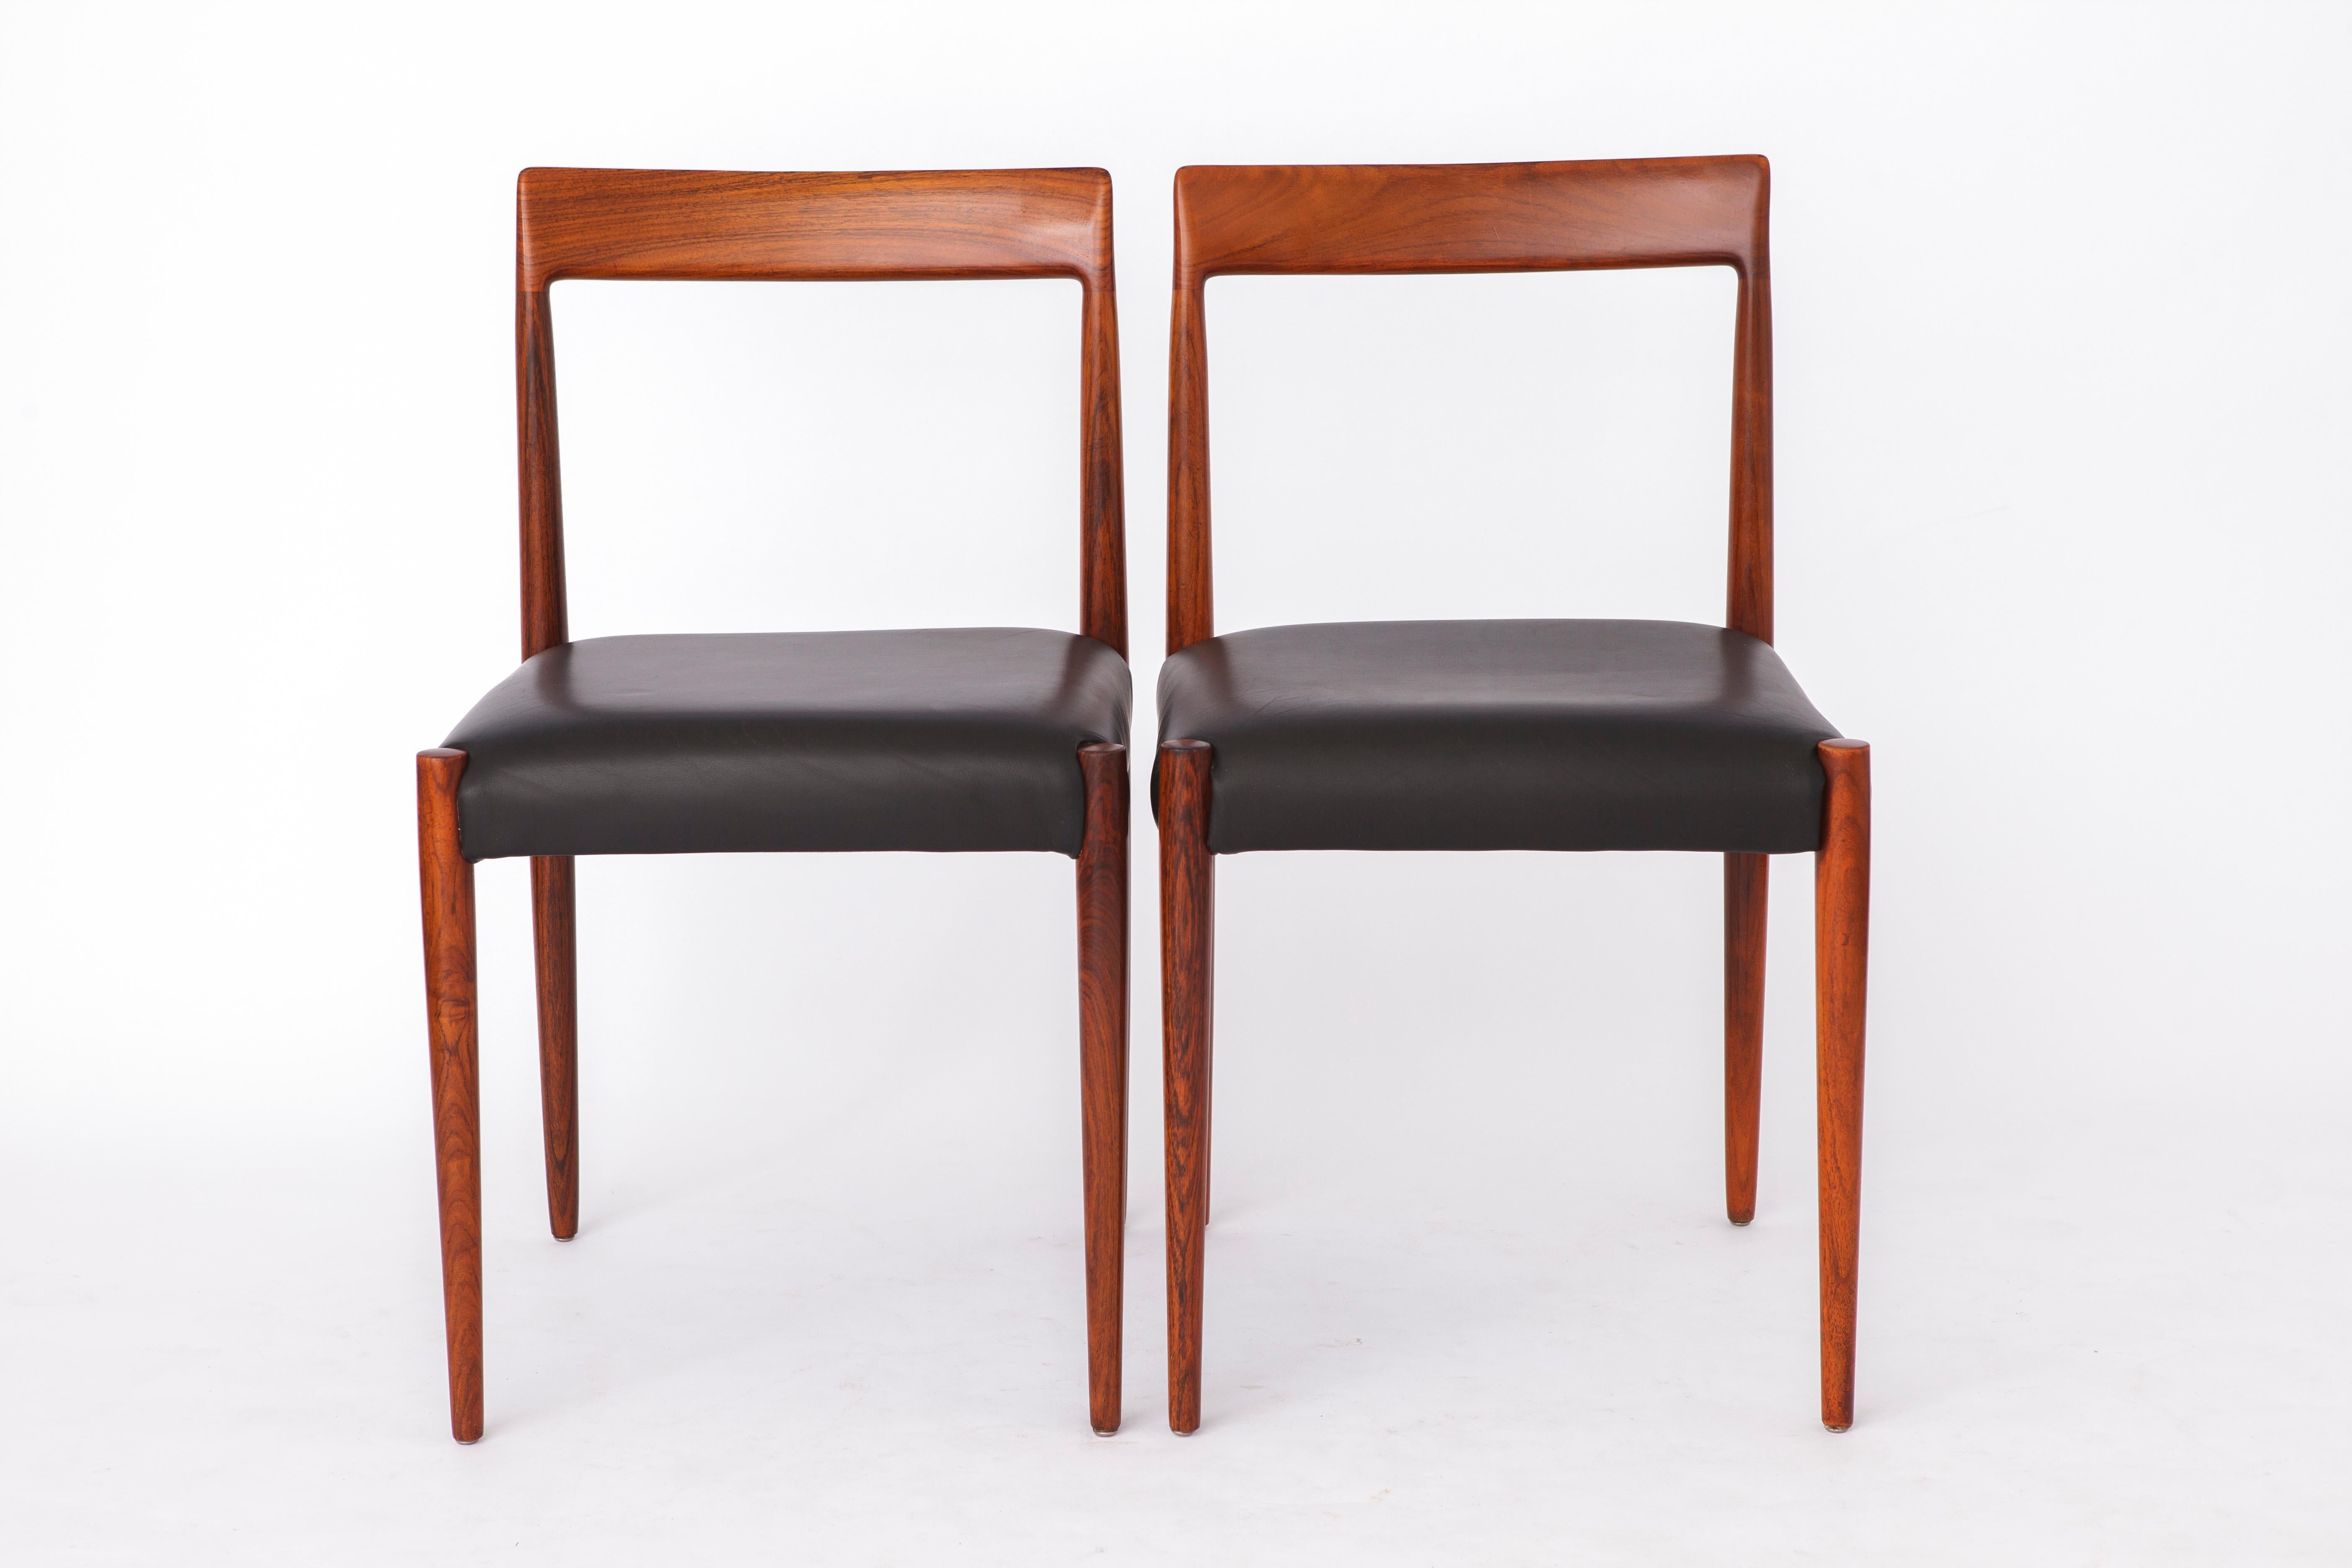 Polished Pair mid century dining chairs, Lübke Germany, 1960s Vintage